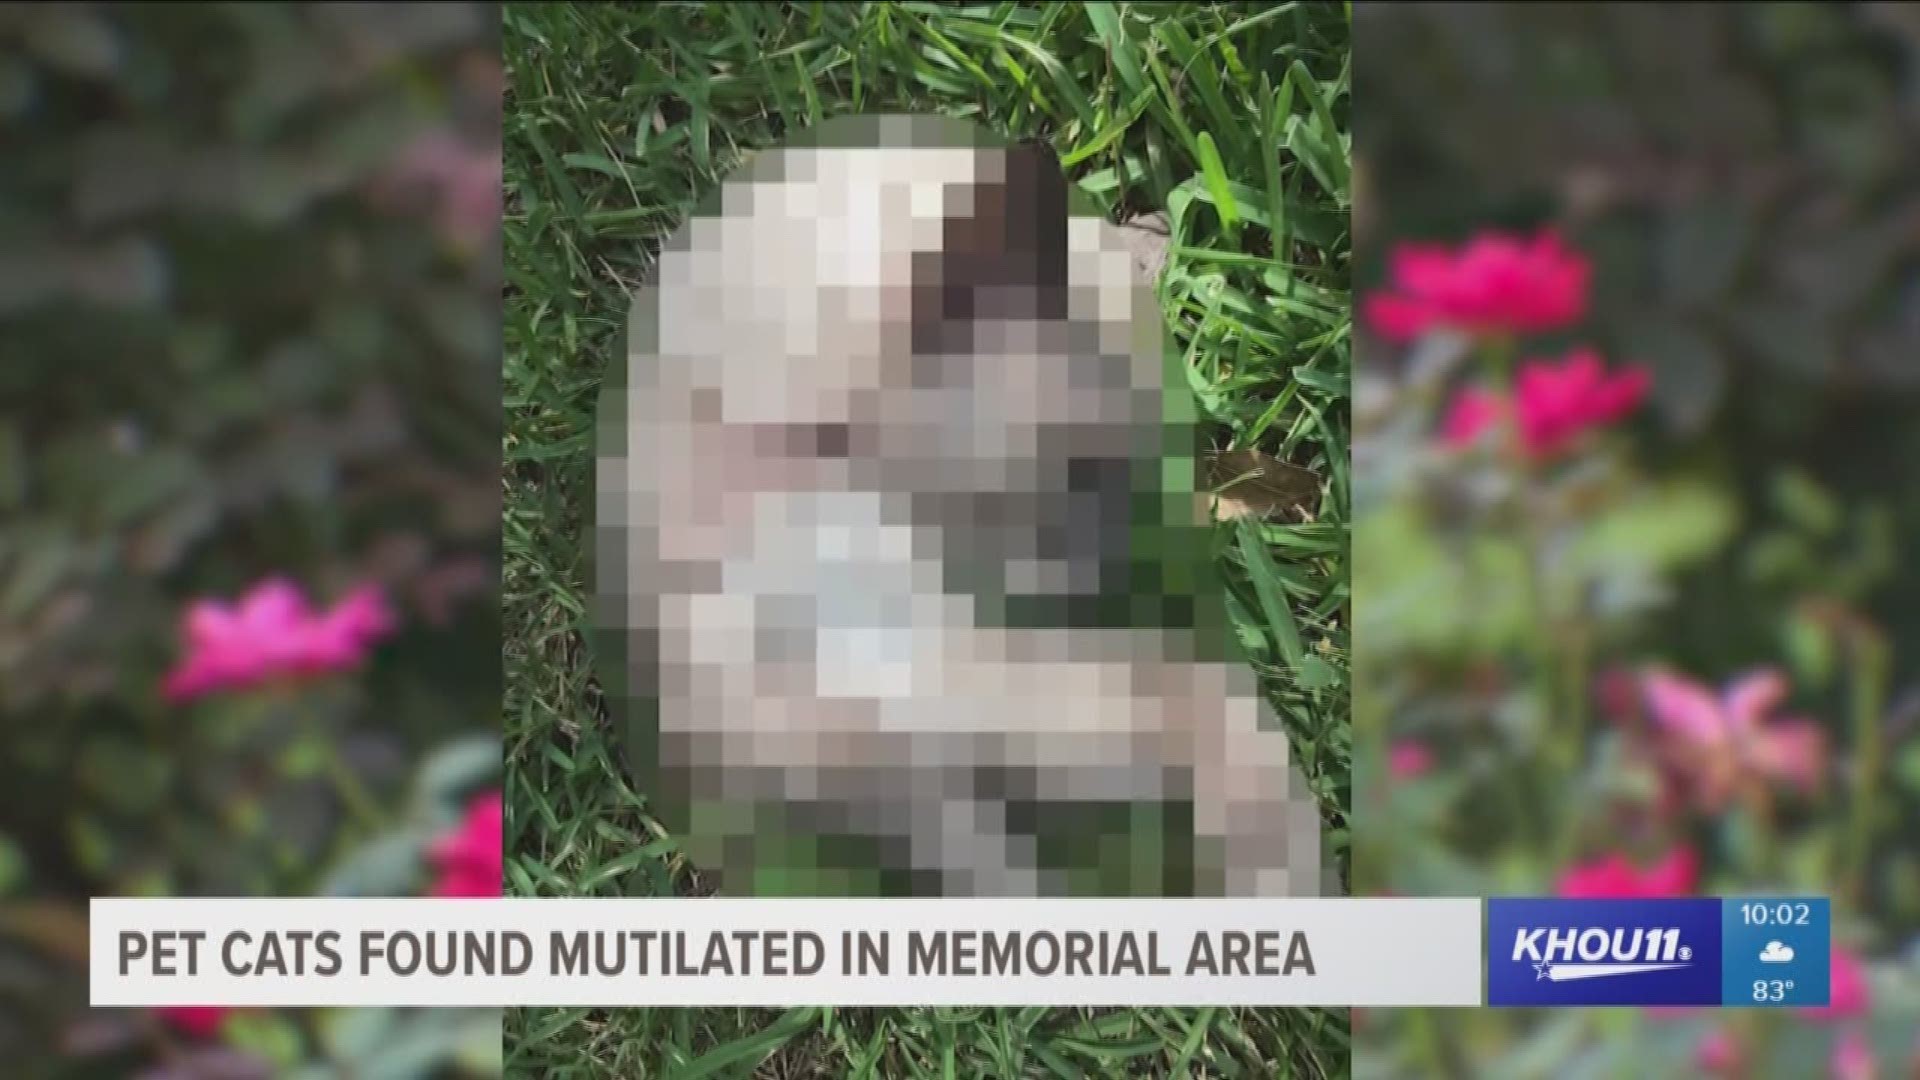 A community in the Memorial area is worried after several neighborhood cats appear to have been mutilated, then placed on front lawns.